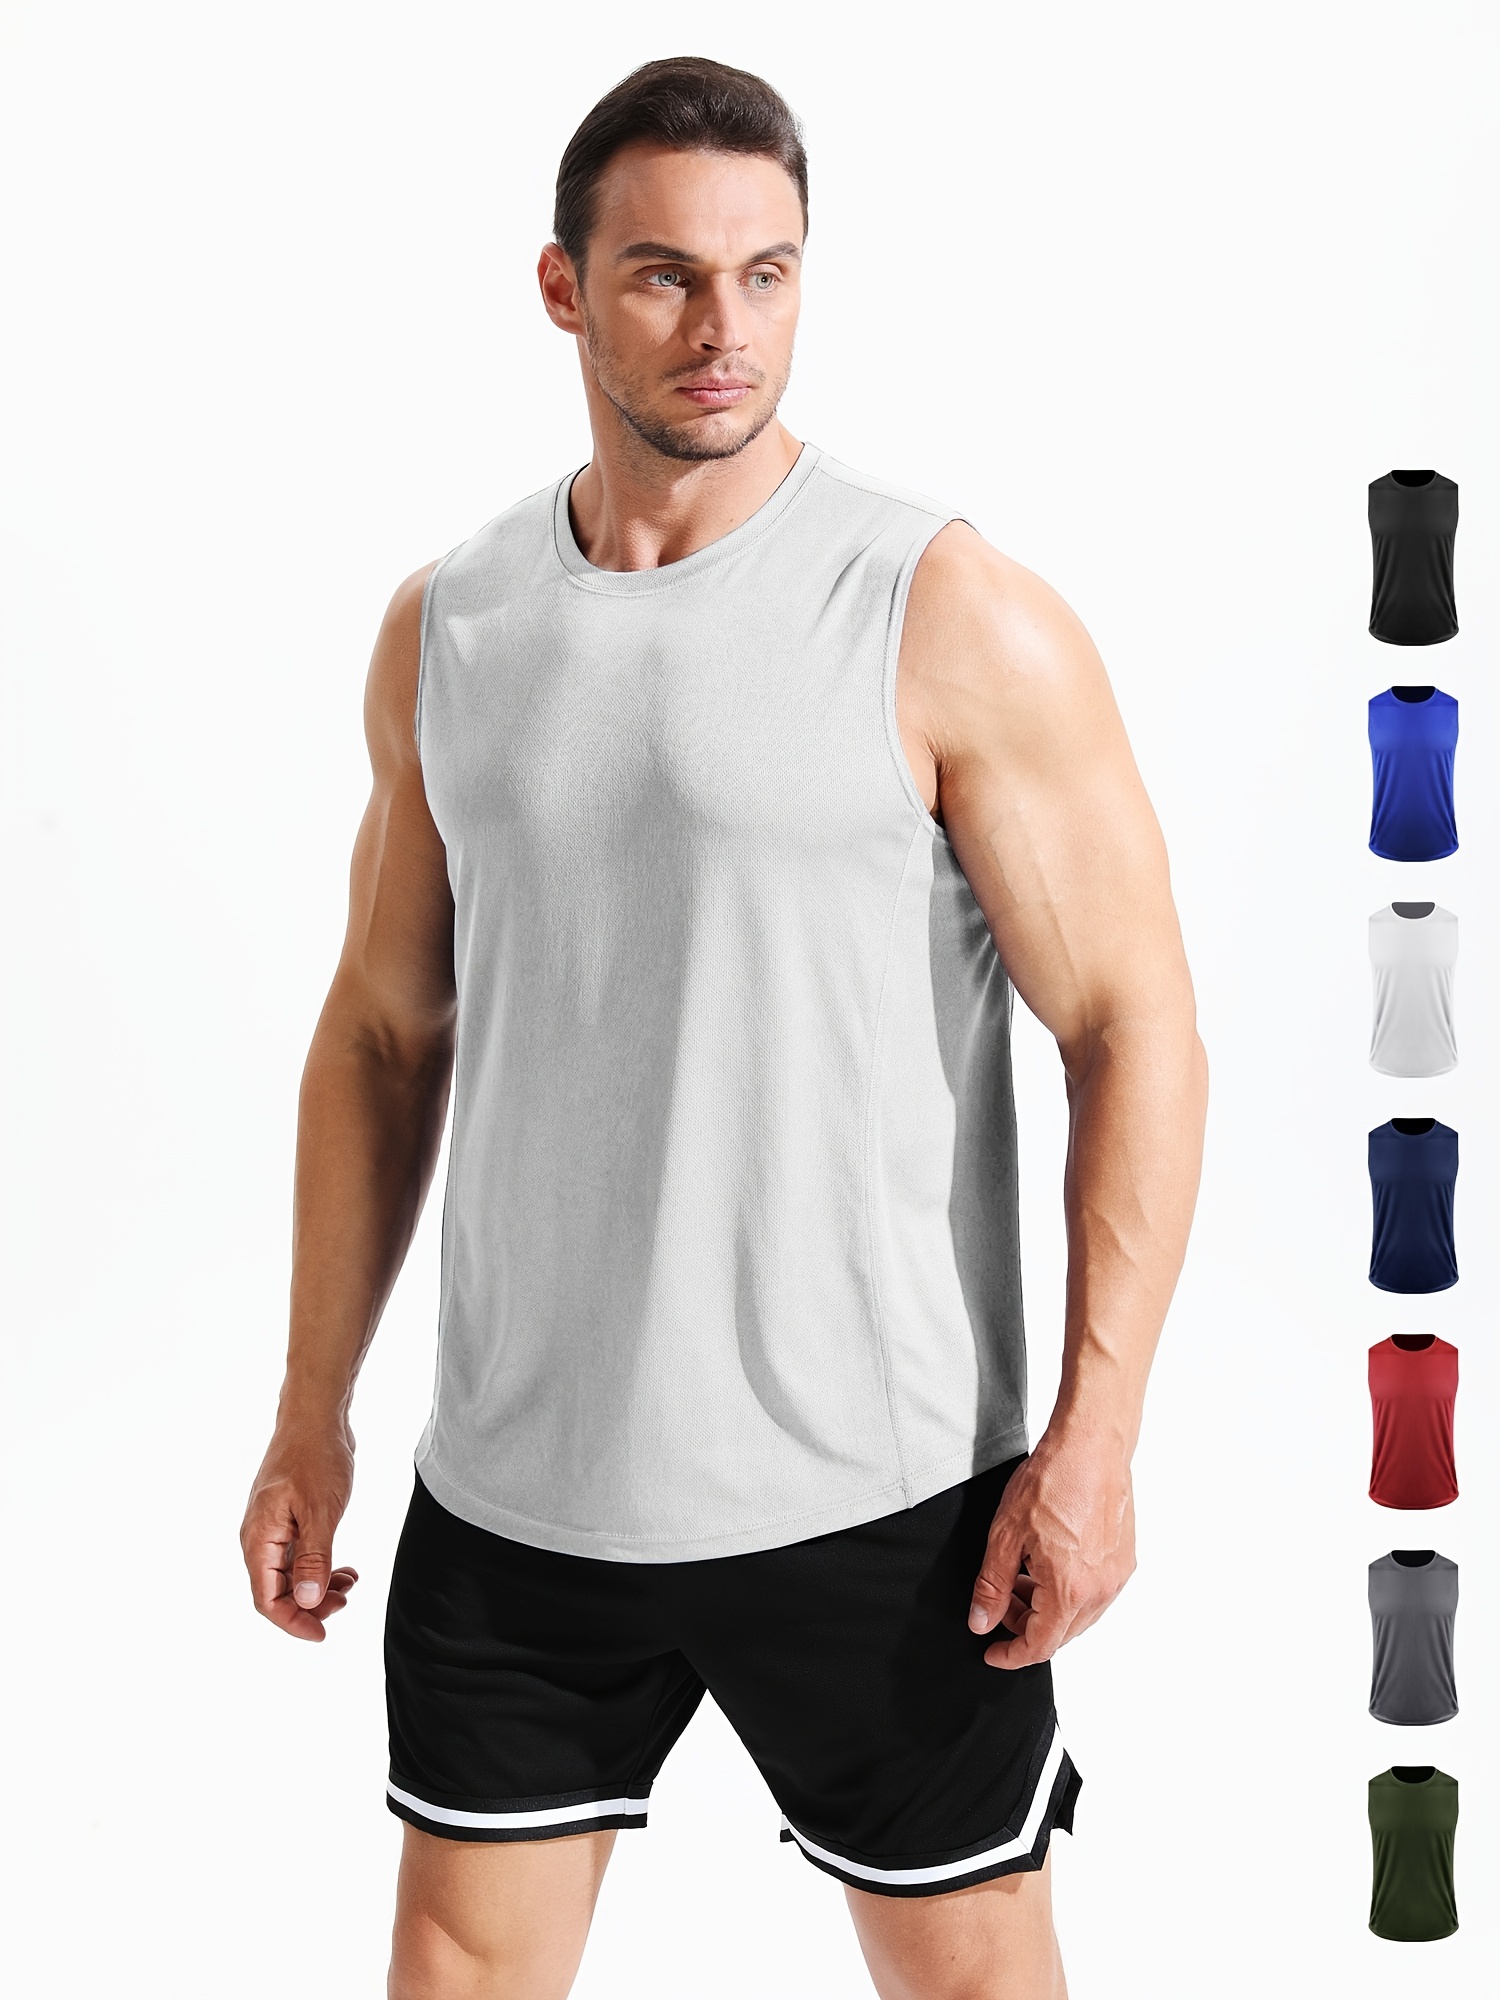 Men's Men Independence Day Summer Vest Breathable Size Casual Sleeveless  Top Loose Full Print Tank Top Crazy Yoga Tops Fashion